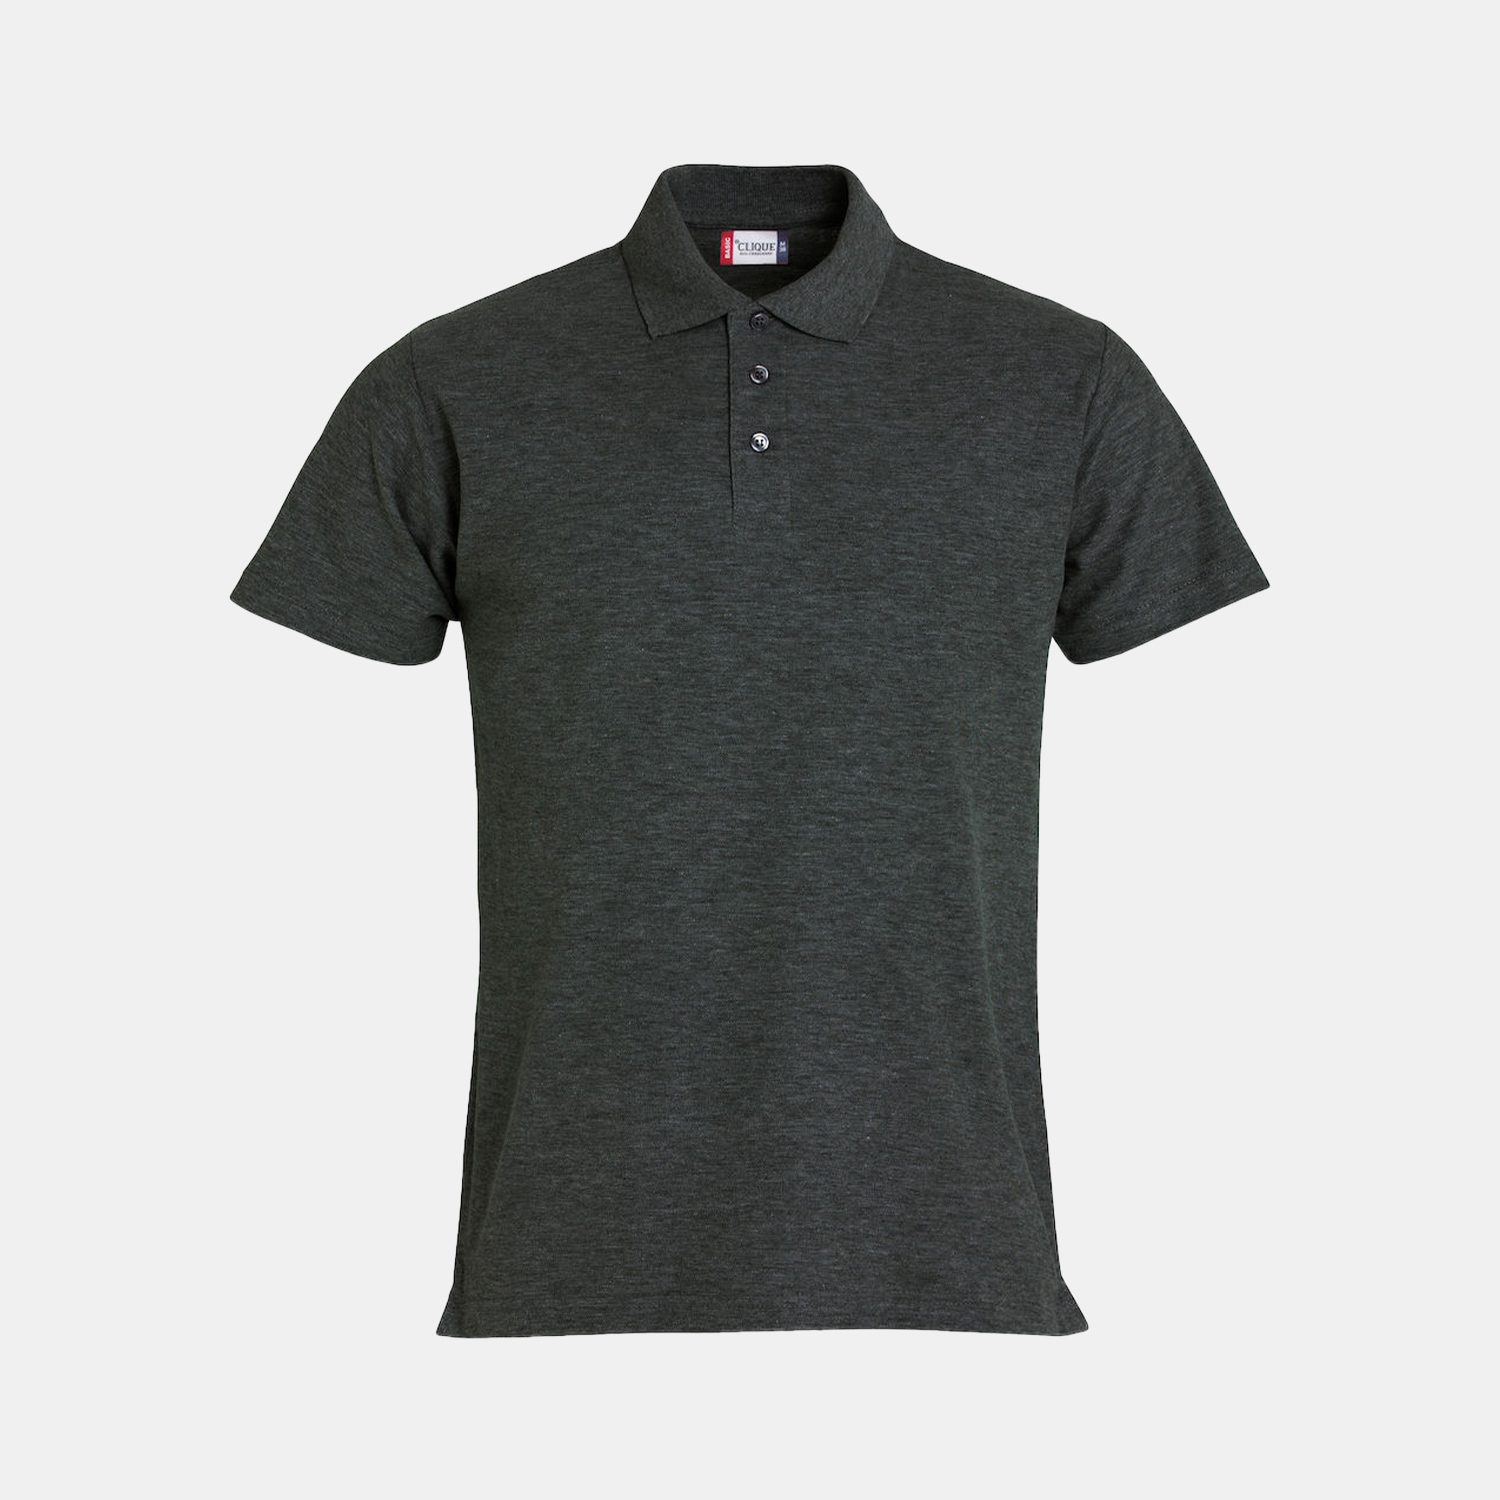 An advertising classic: The Basic | Shirt Polo SUGGLE